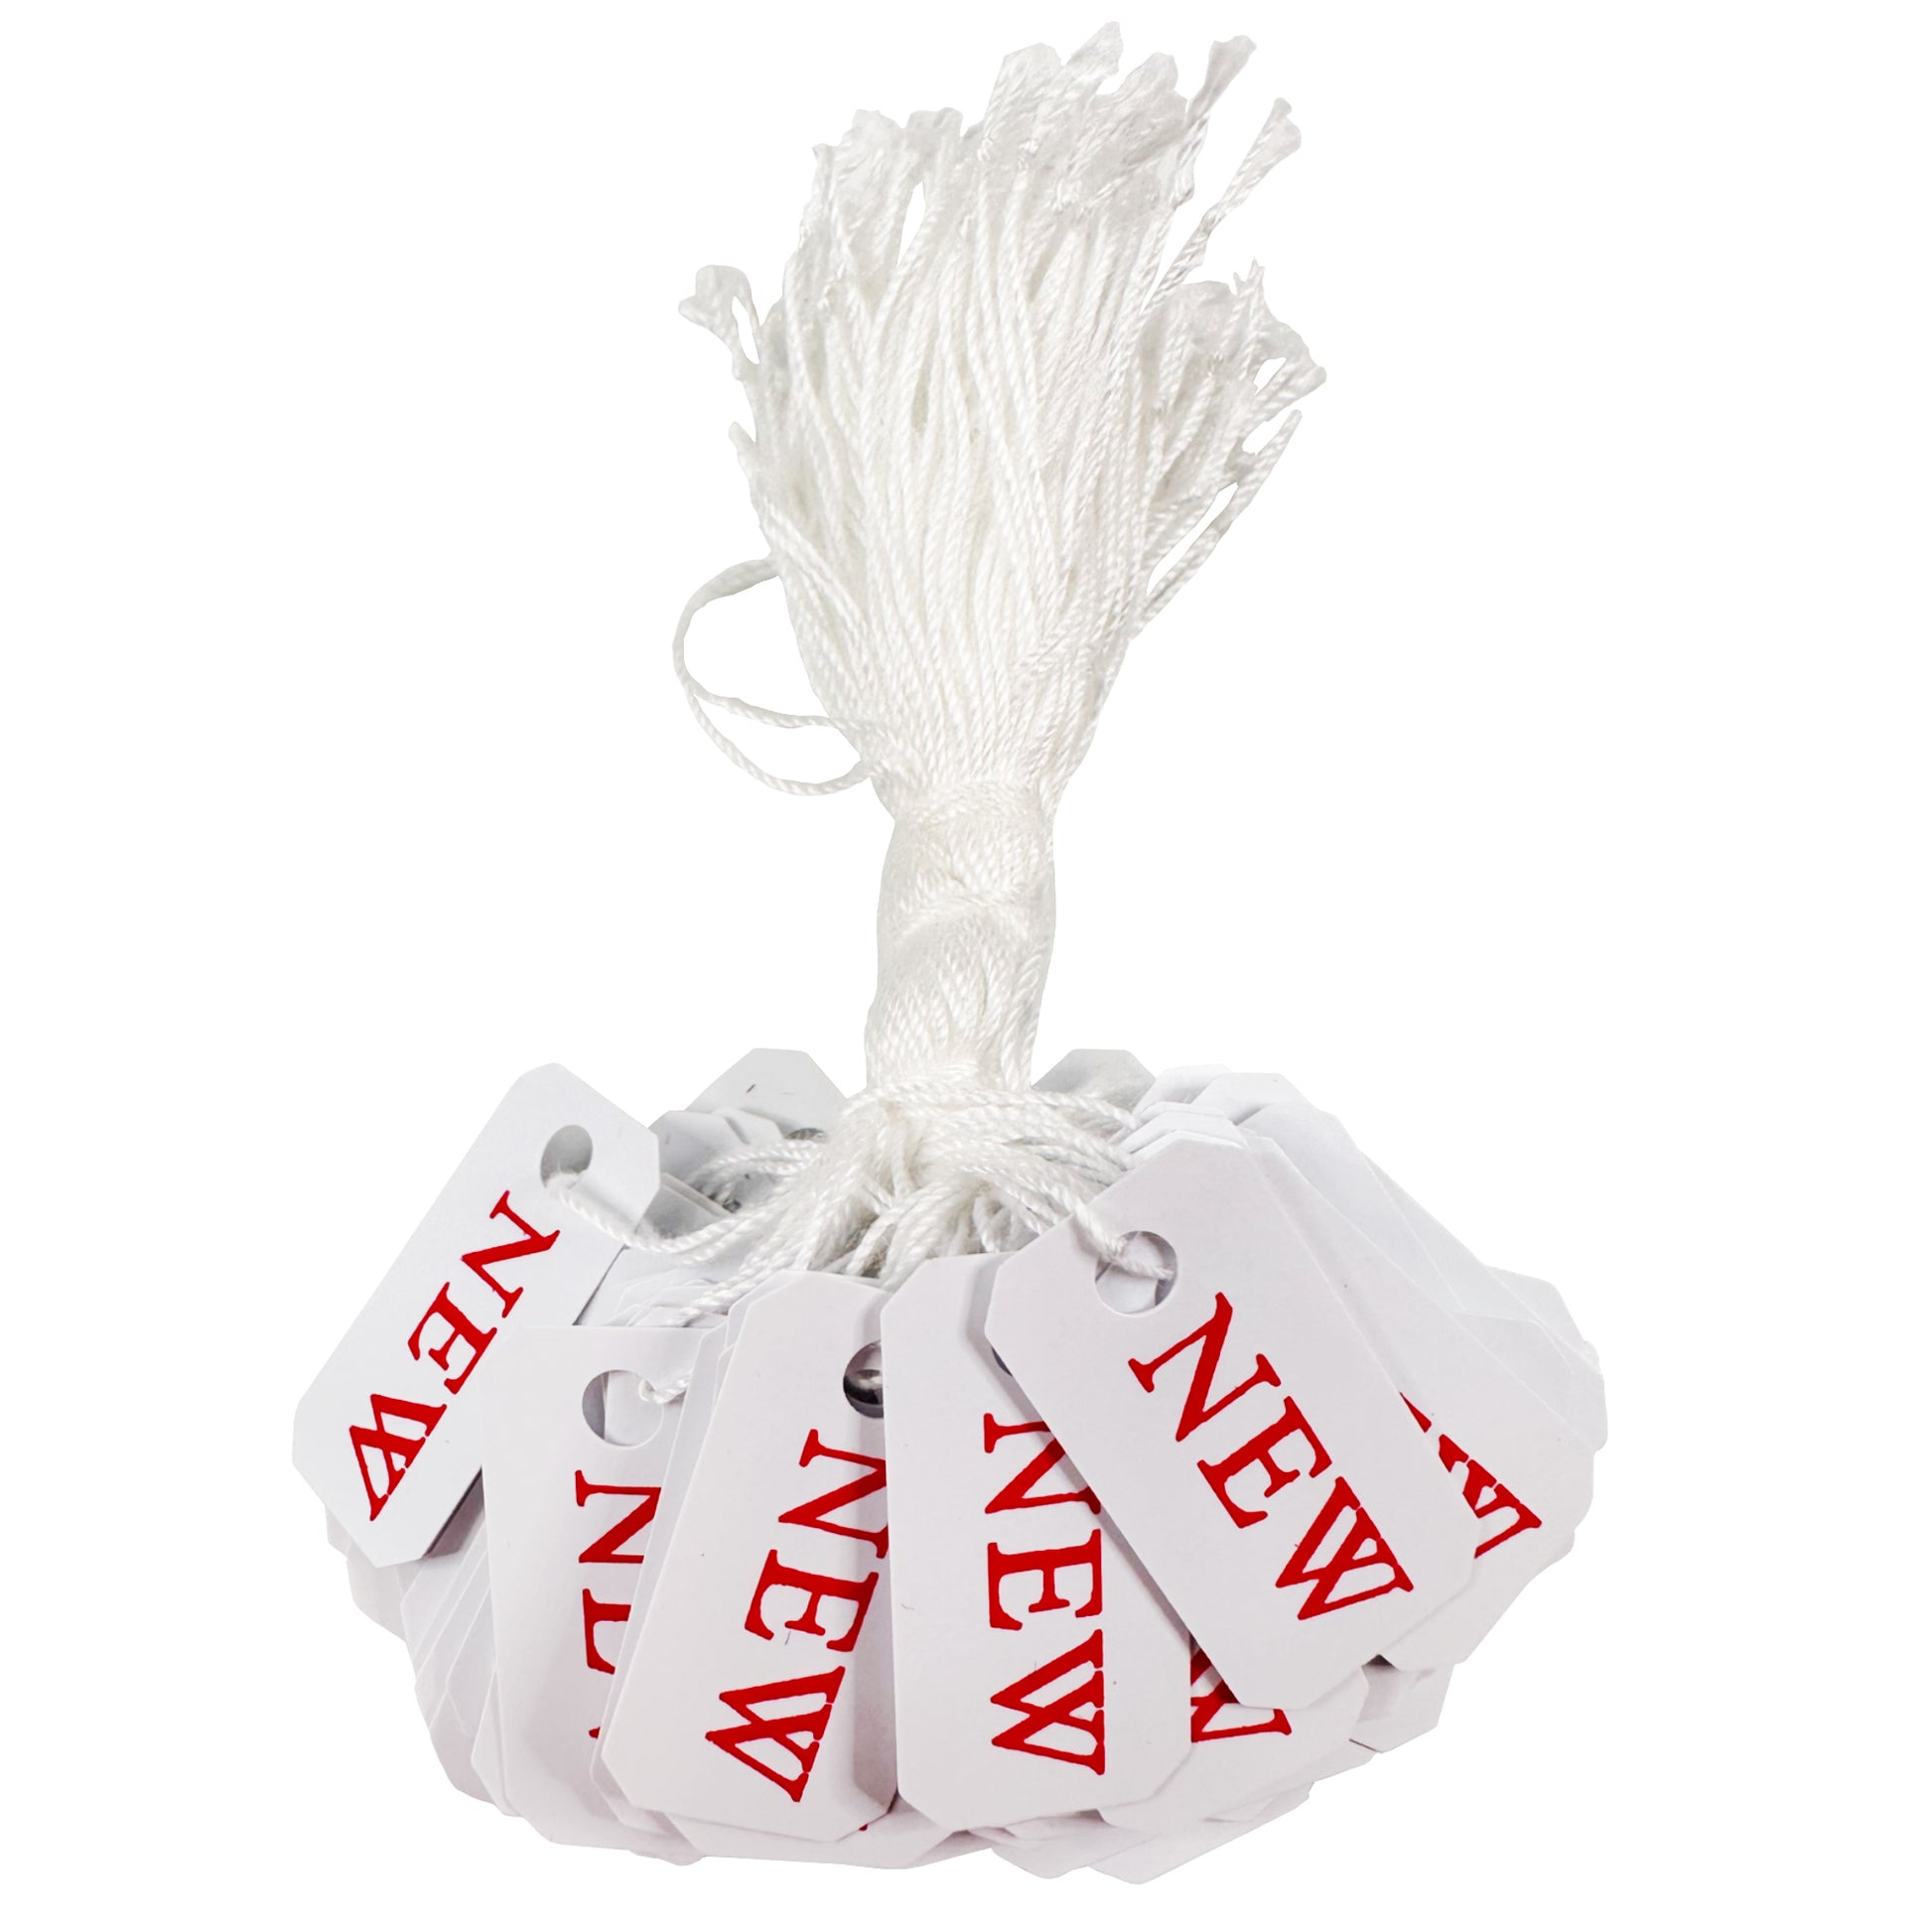 100Pcs Price Tags with String Attached Writable for Product